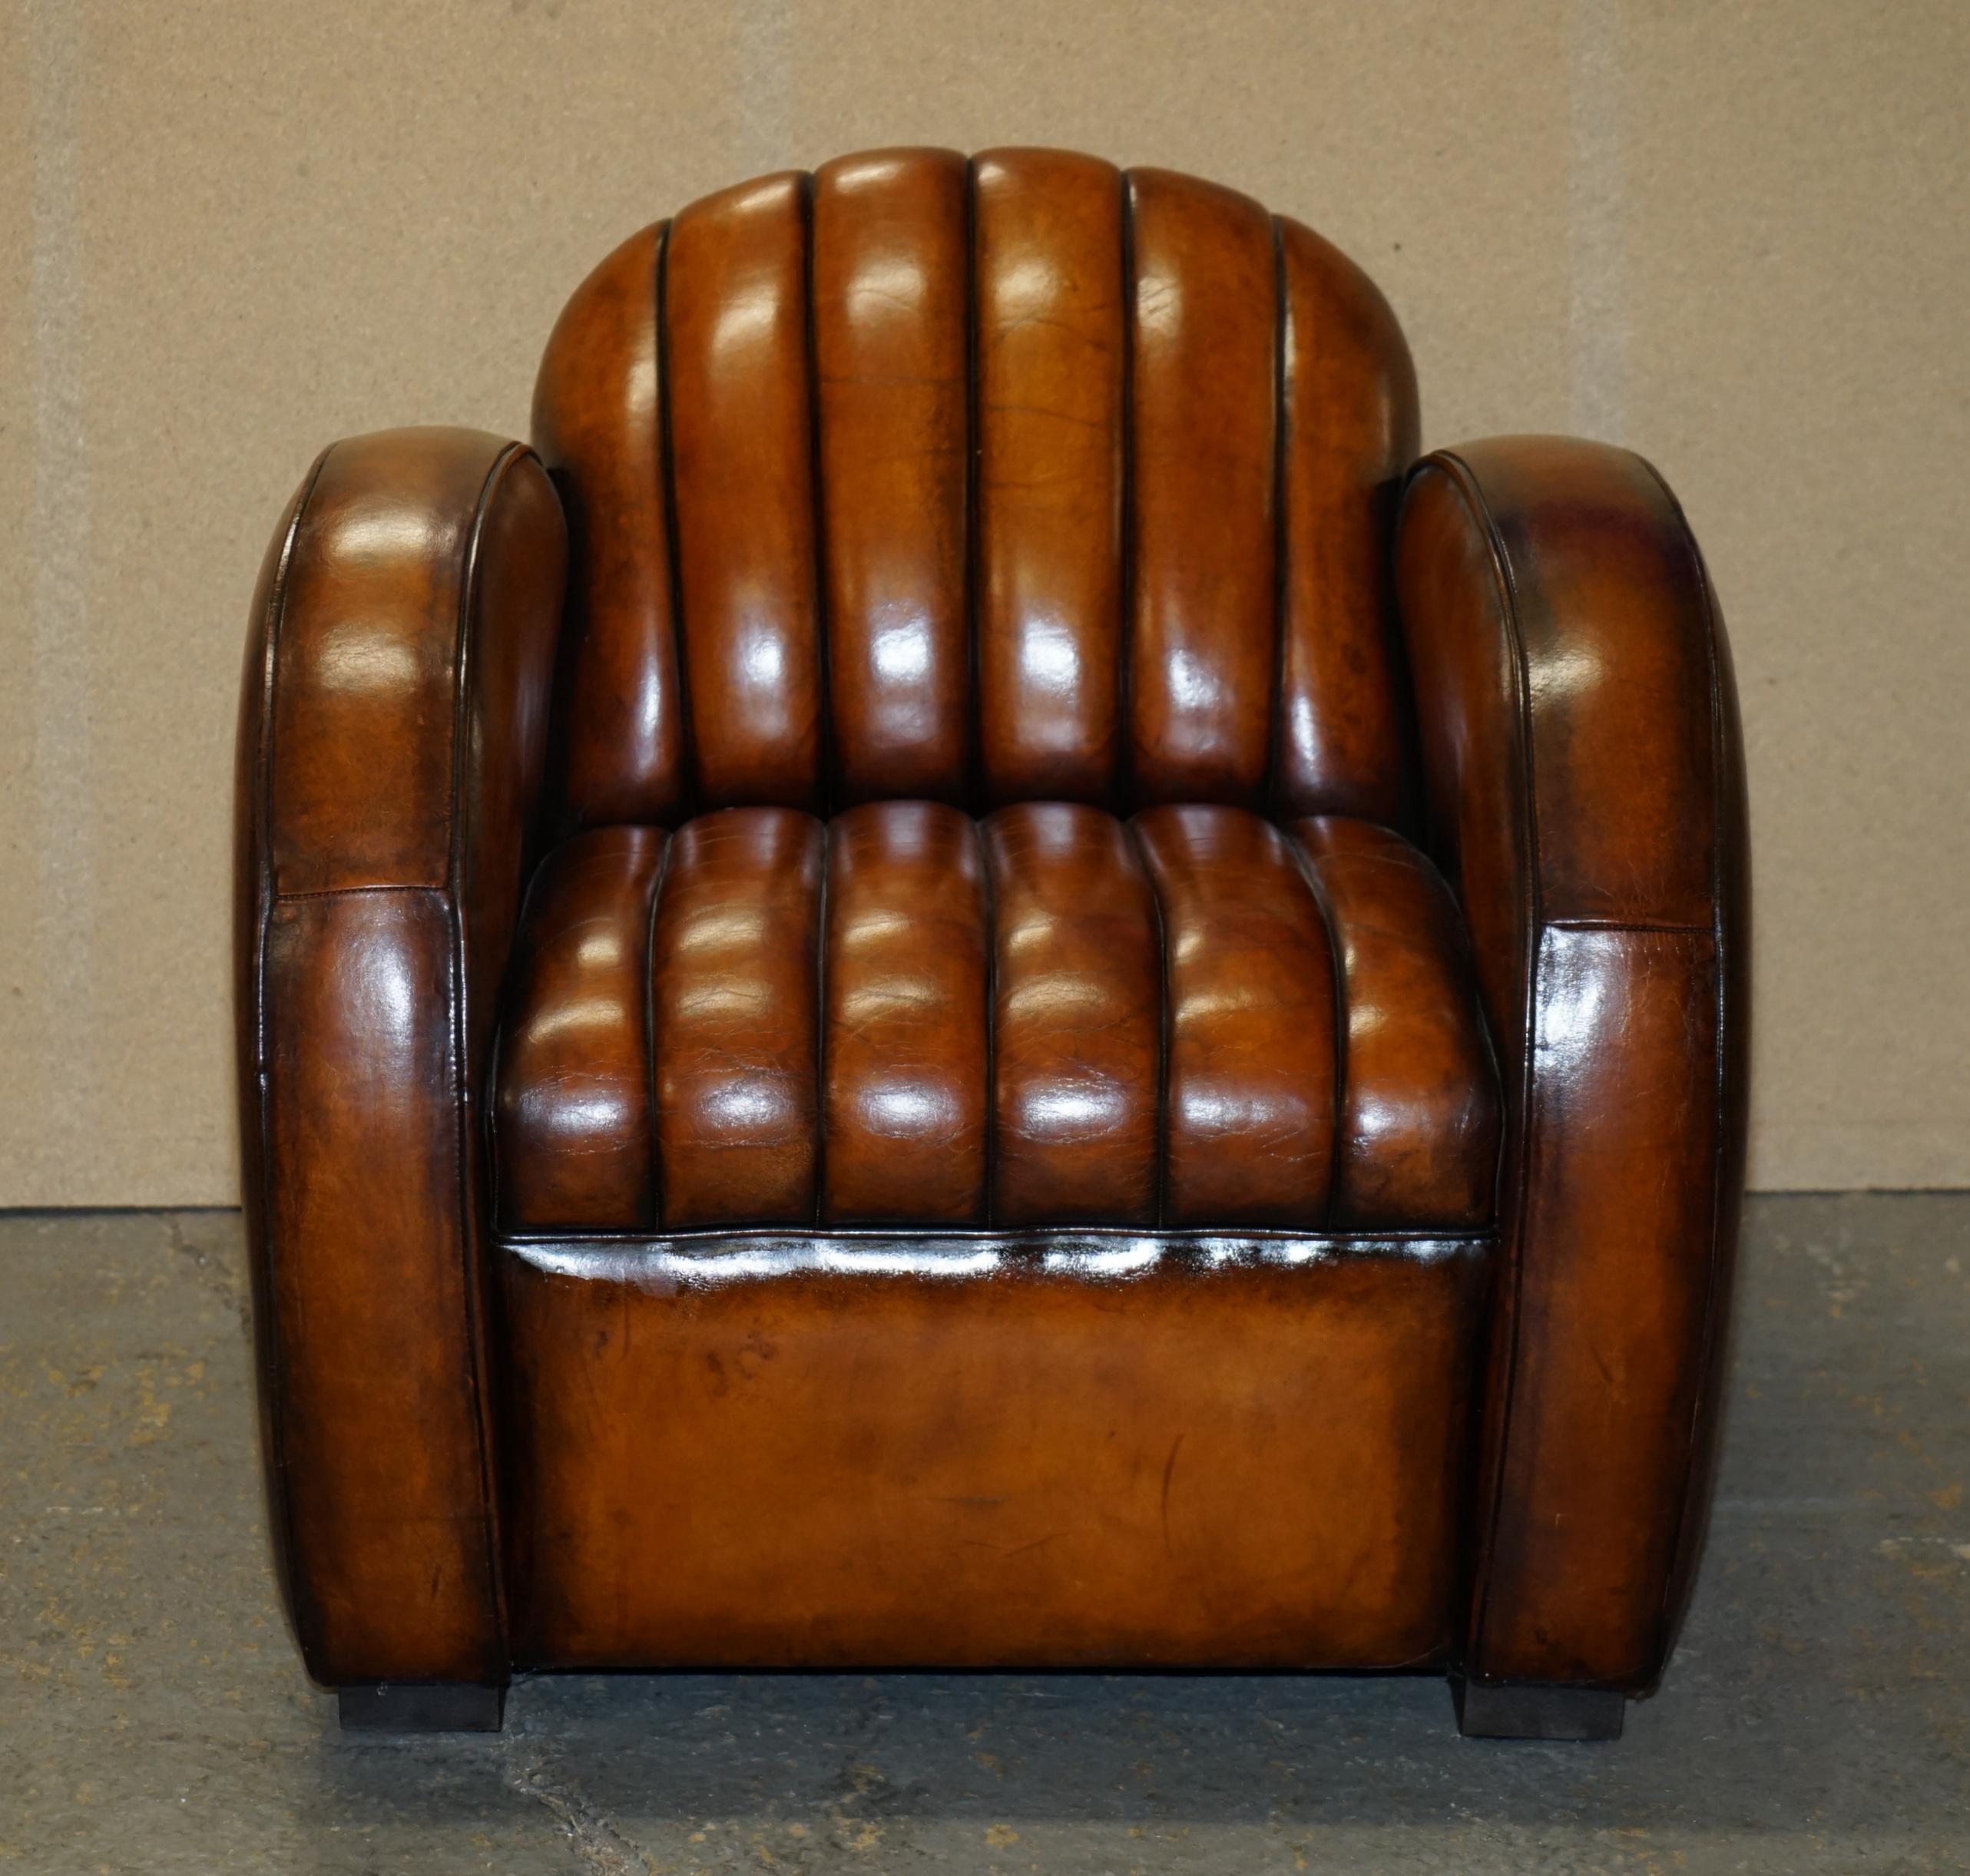 Royal House Antiques

Royal House Antiques is delighted to offer for sale this stunning fully restored hand dyed cigar brown leather, Art Deco style armchair based on the 1966 Mustang Fastback

Please note the delivery fee listed is just a guide, it